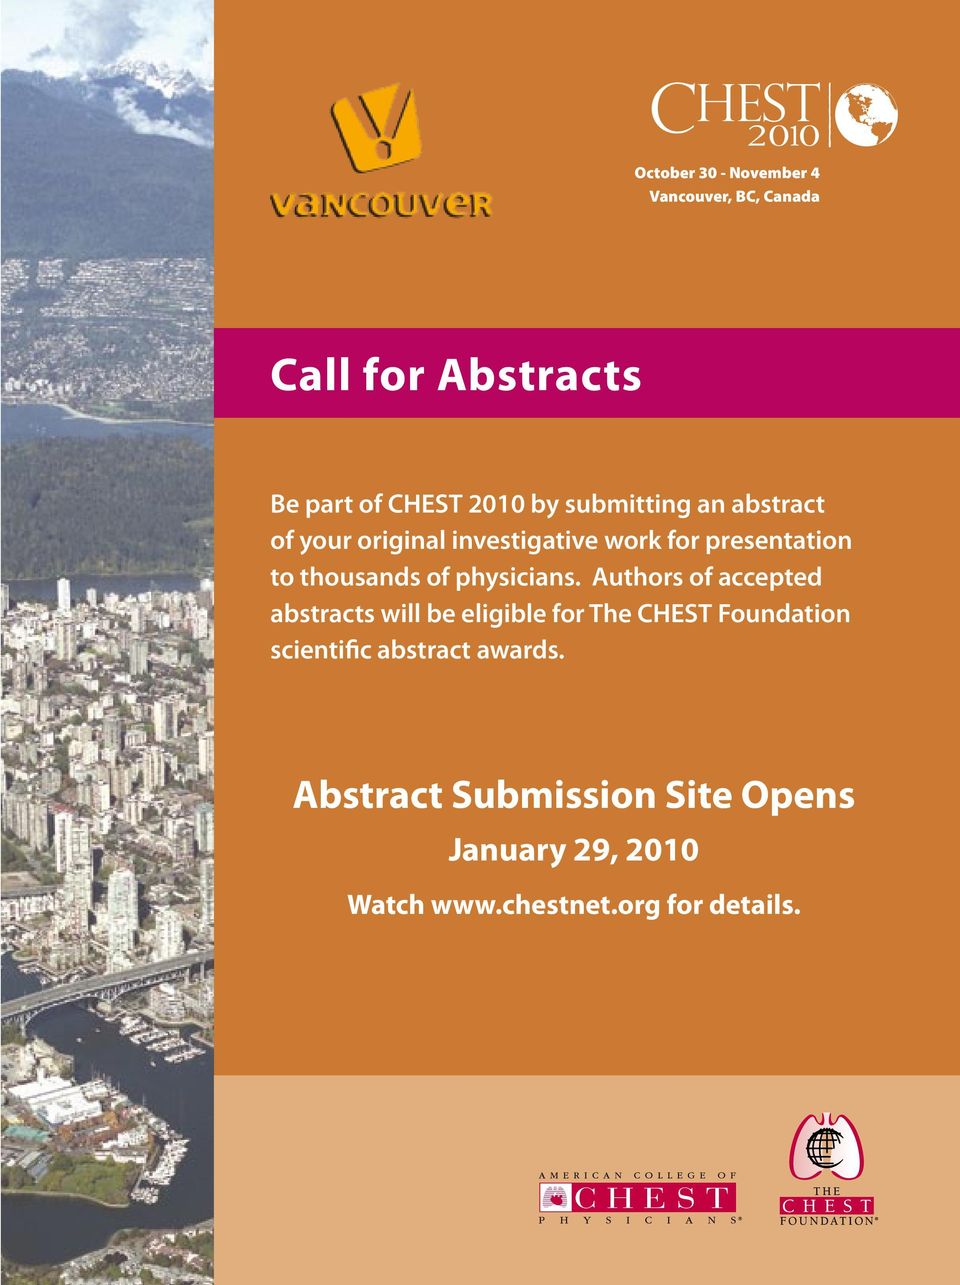 Authors of accepted abstracts will be eligible for The CHEST Foundation scientific abstract awards.